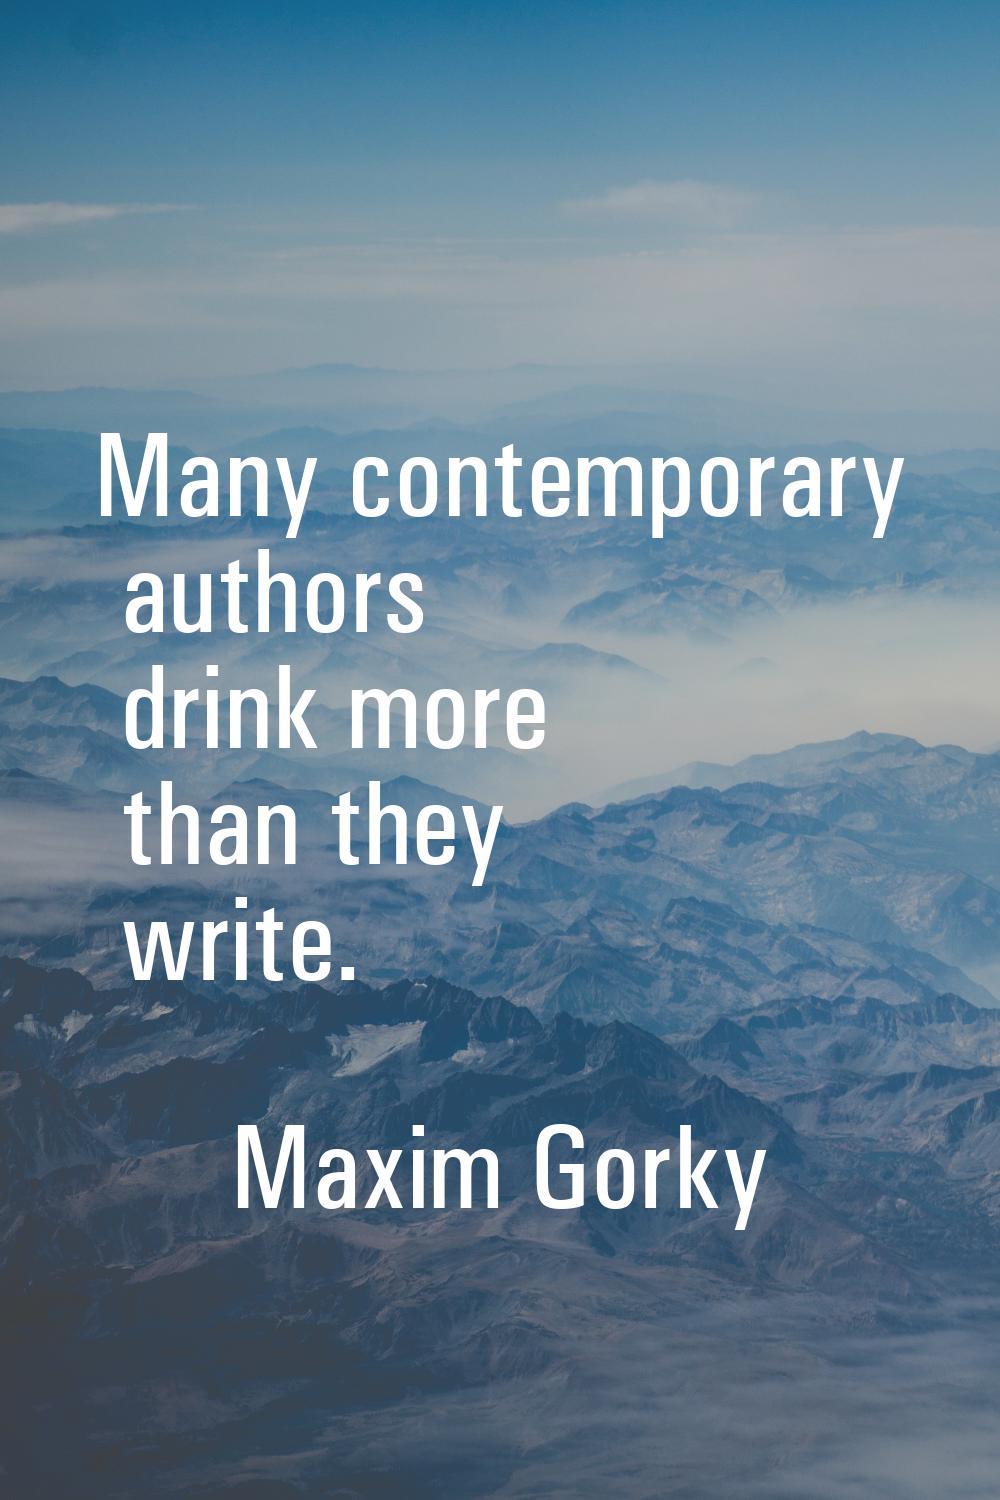 Many contemporary authors drink more than they write.